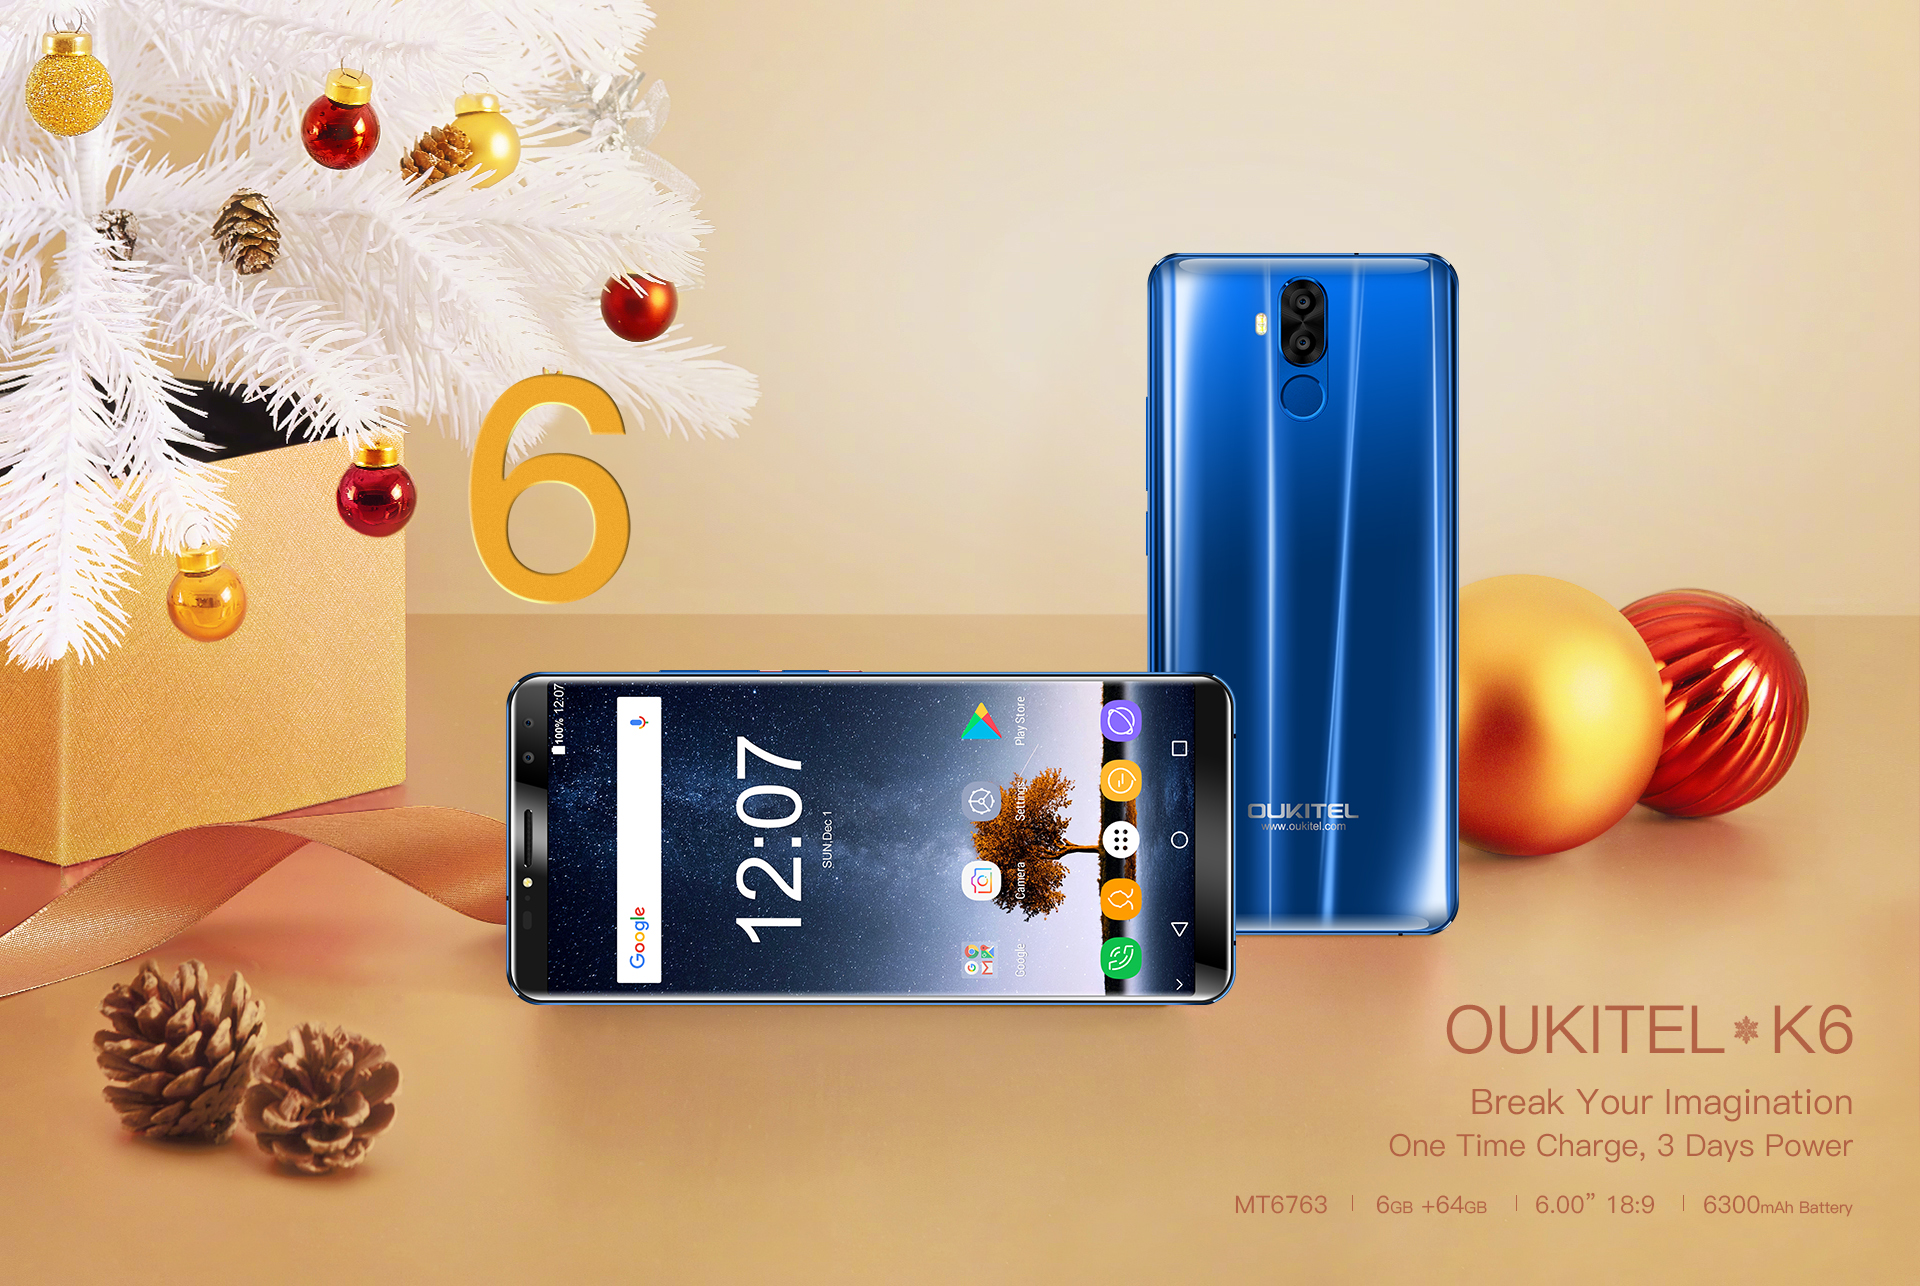 How to get a smartphone OUKITEL K6 absolutely free